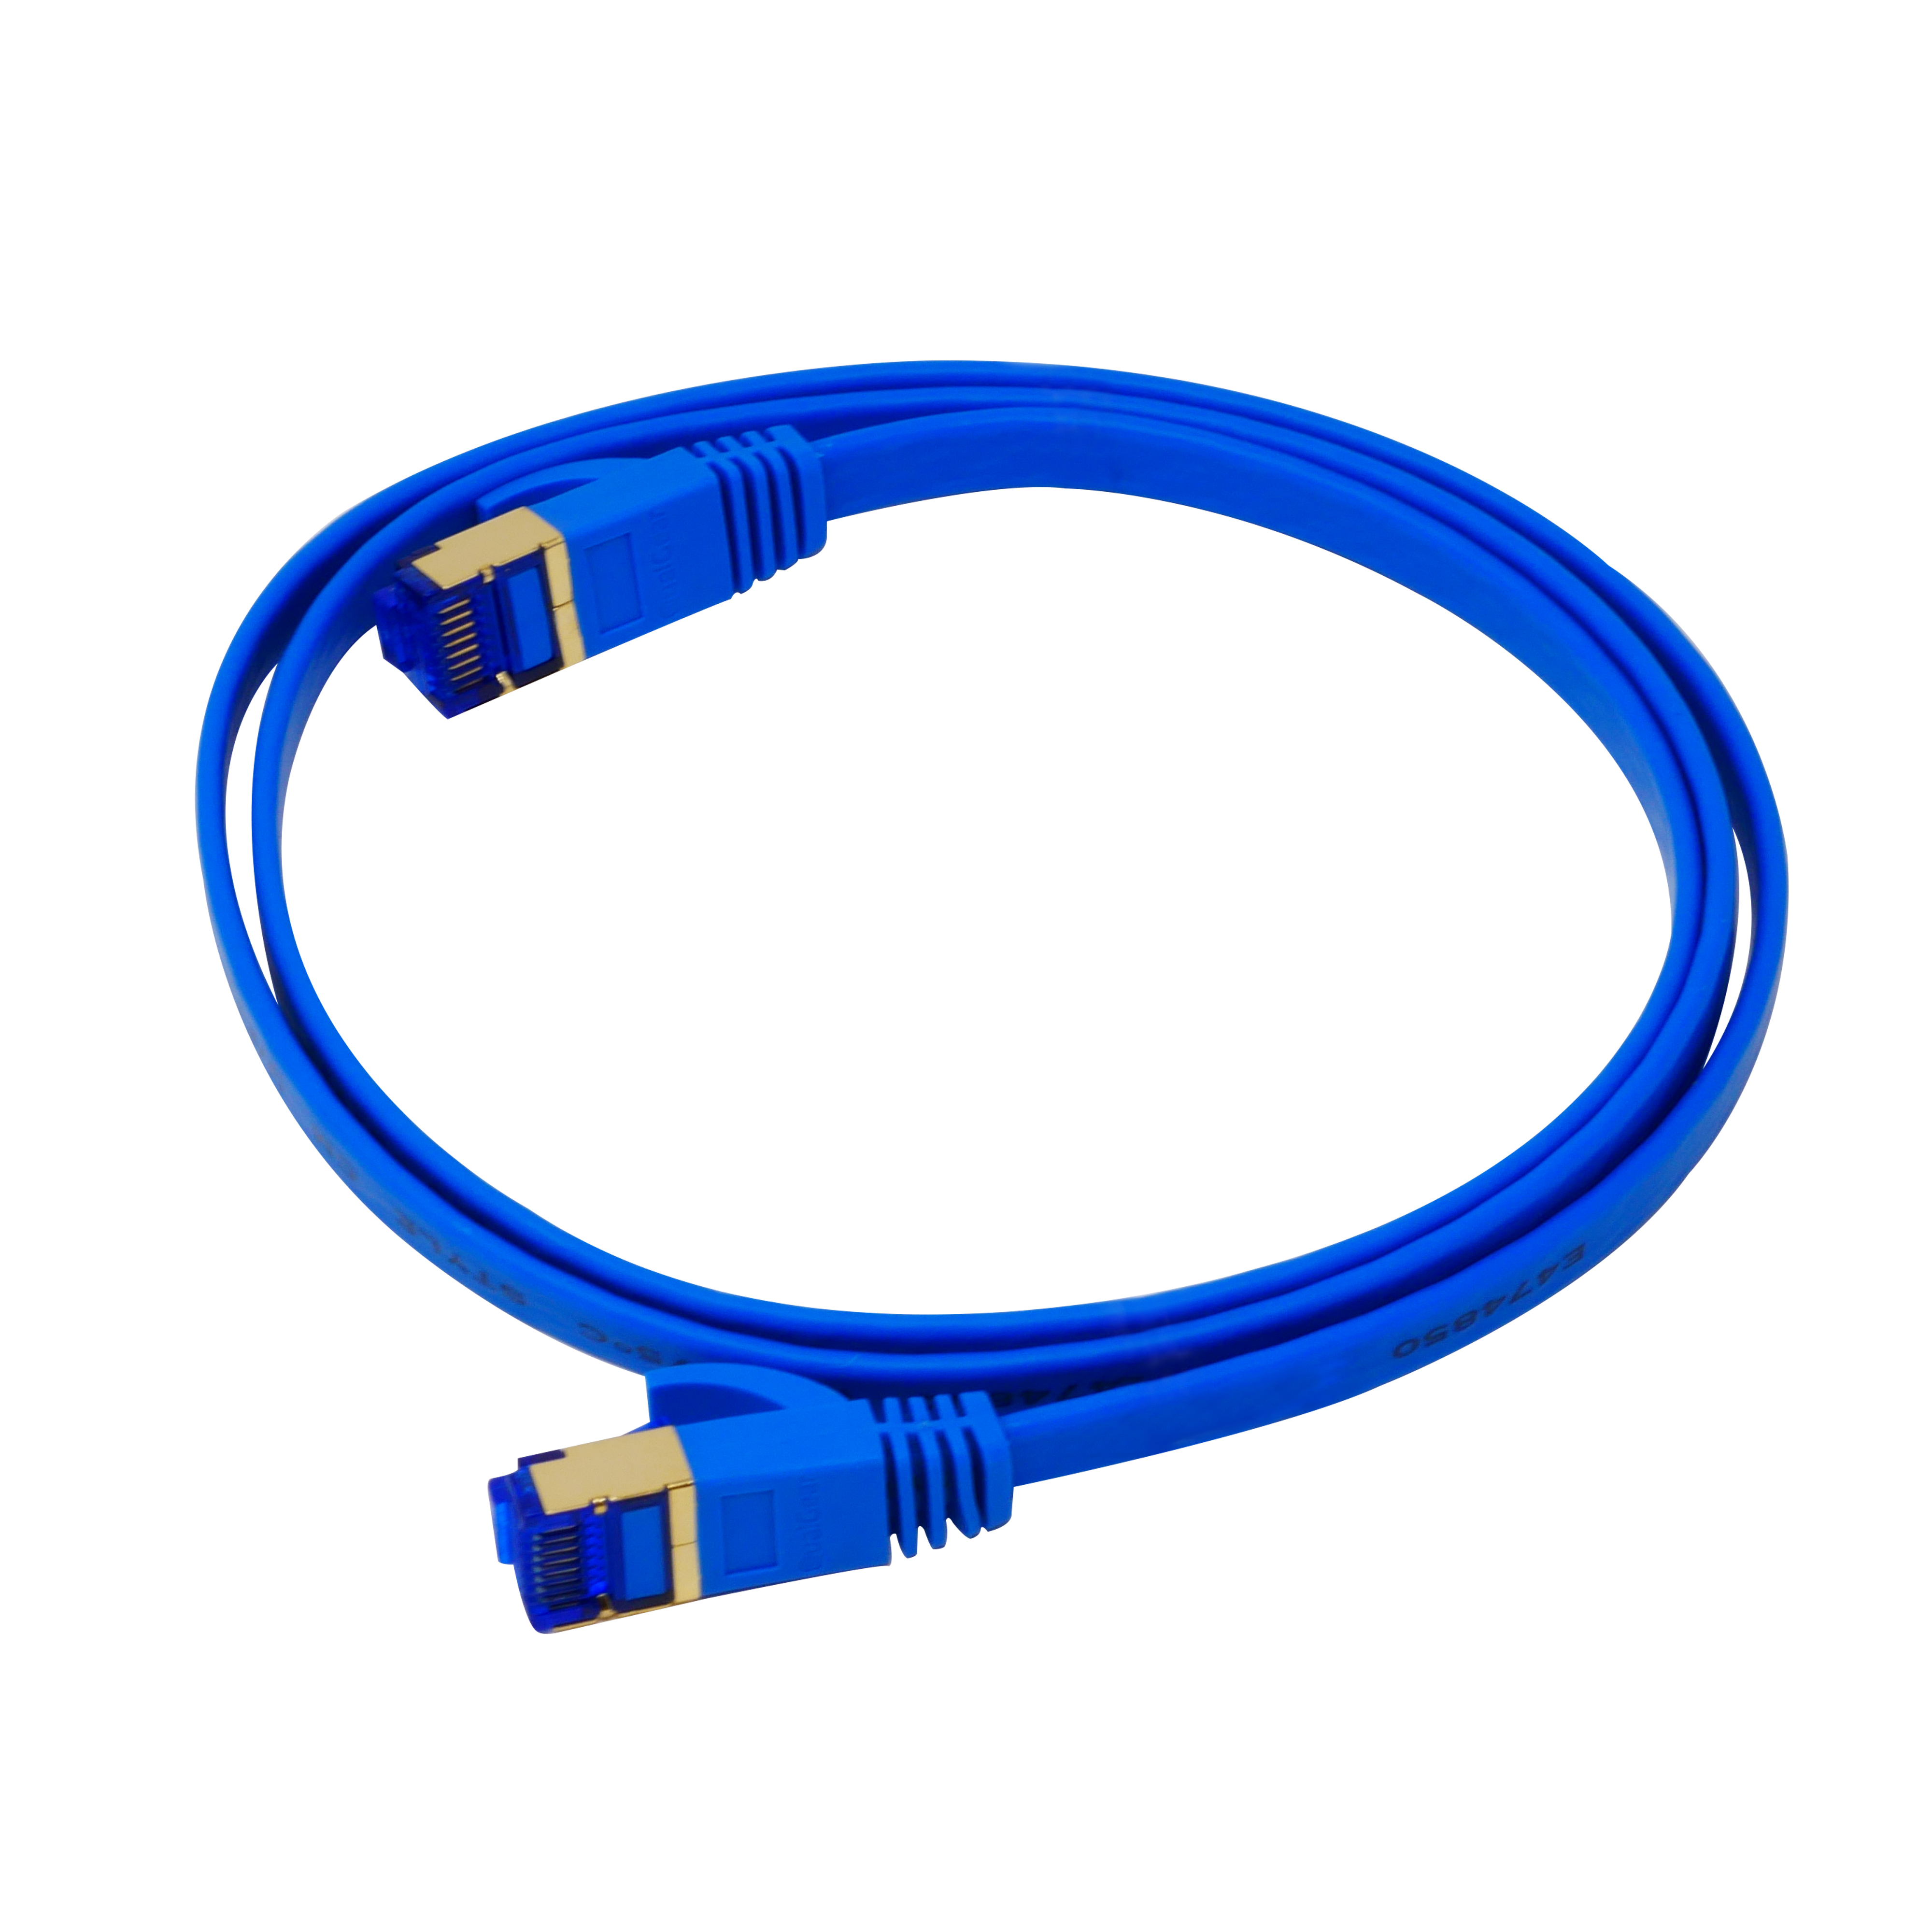 QualGear QG-CAT7F-3FT-BLU CAT 7 S/FTP Ethernet Cable Length 3 feet - 26 AWG, 10 Gbps, Gold Plated Contacts, RJ45, 99.99% OFC Copper, Color Blue  